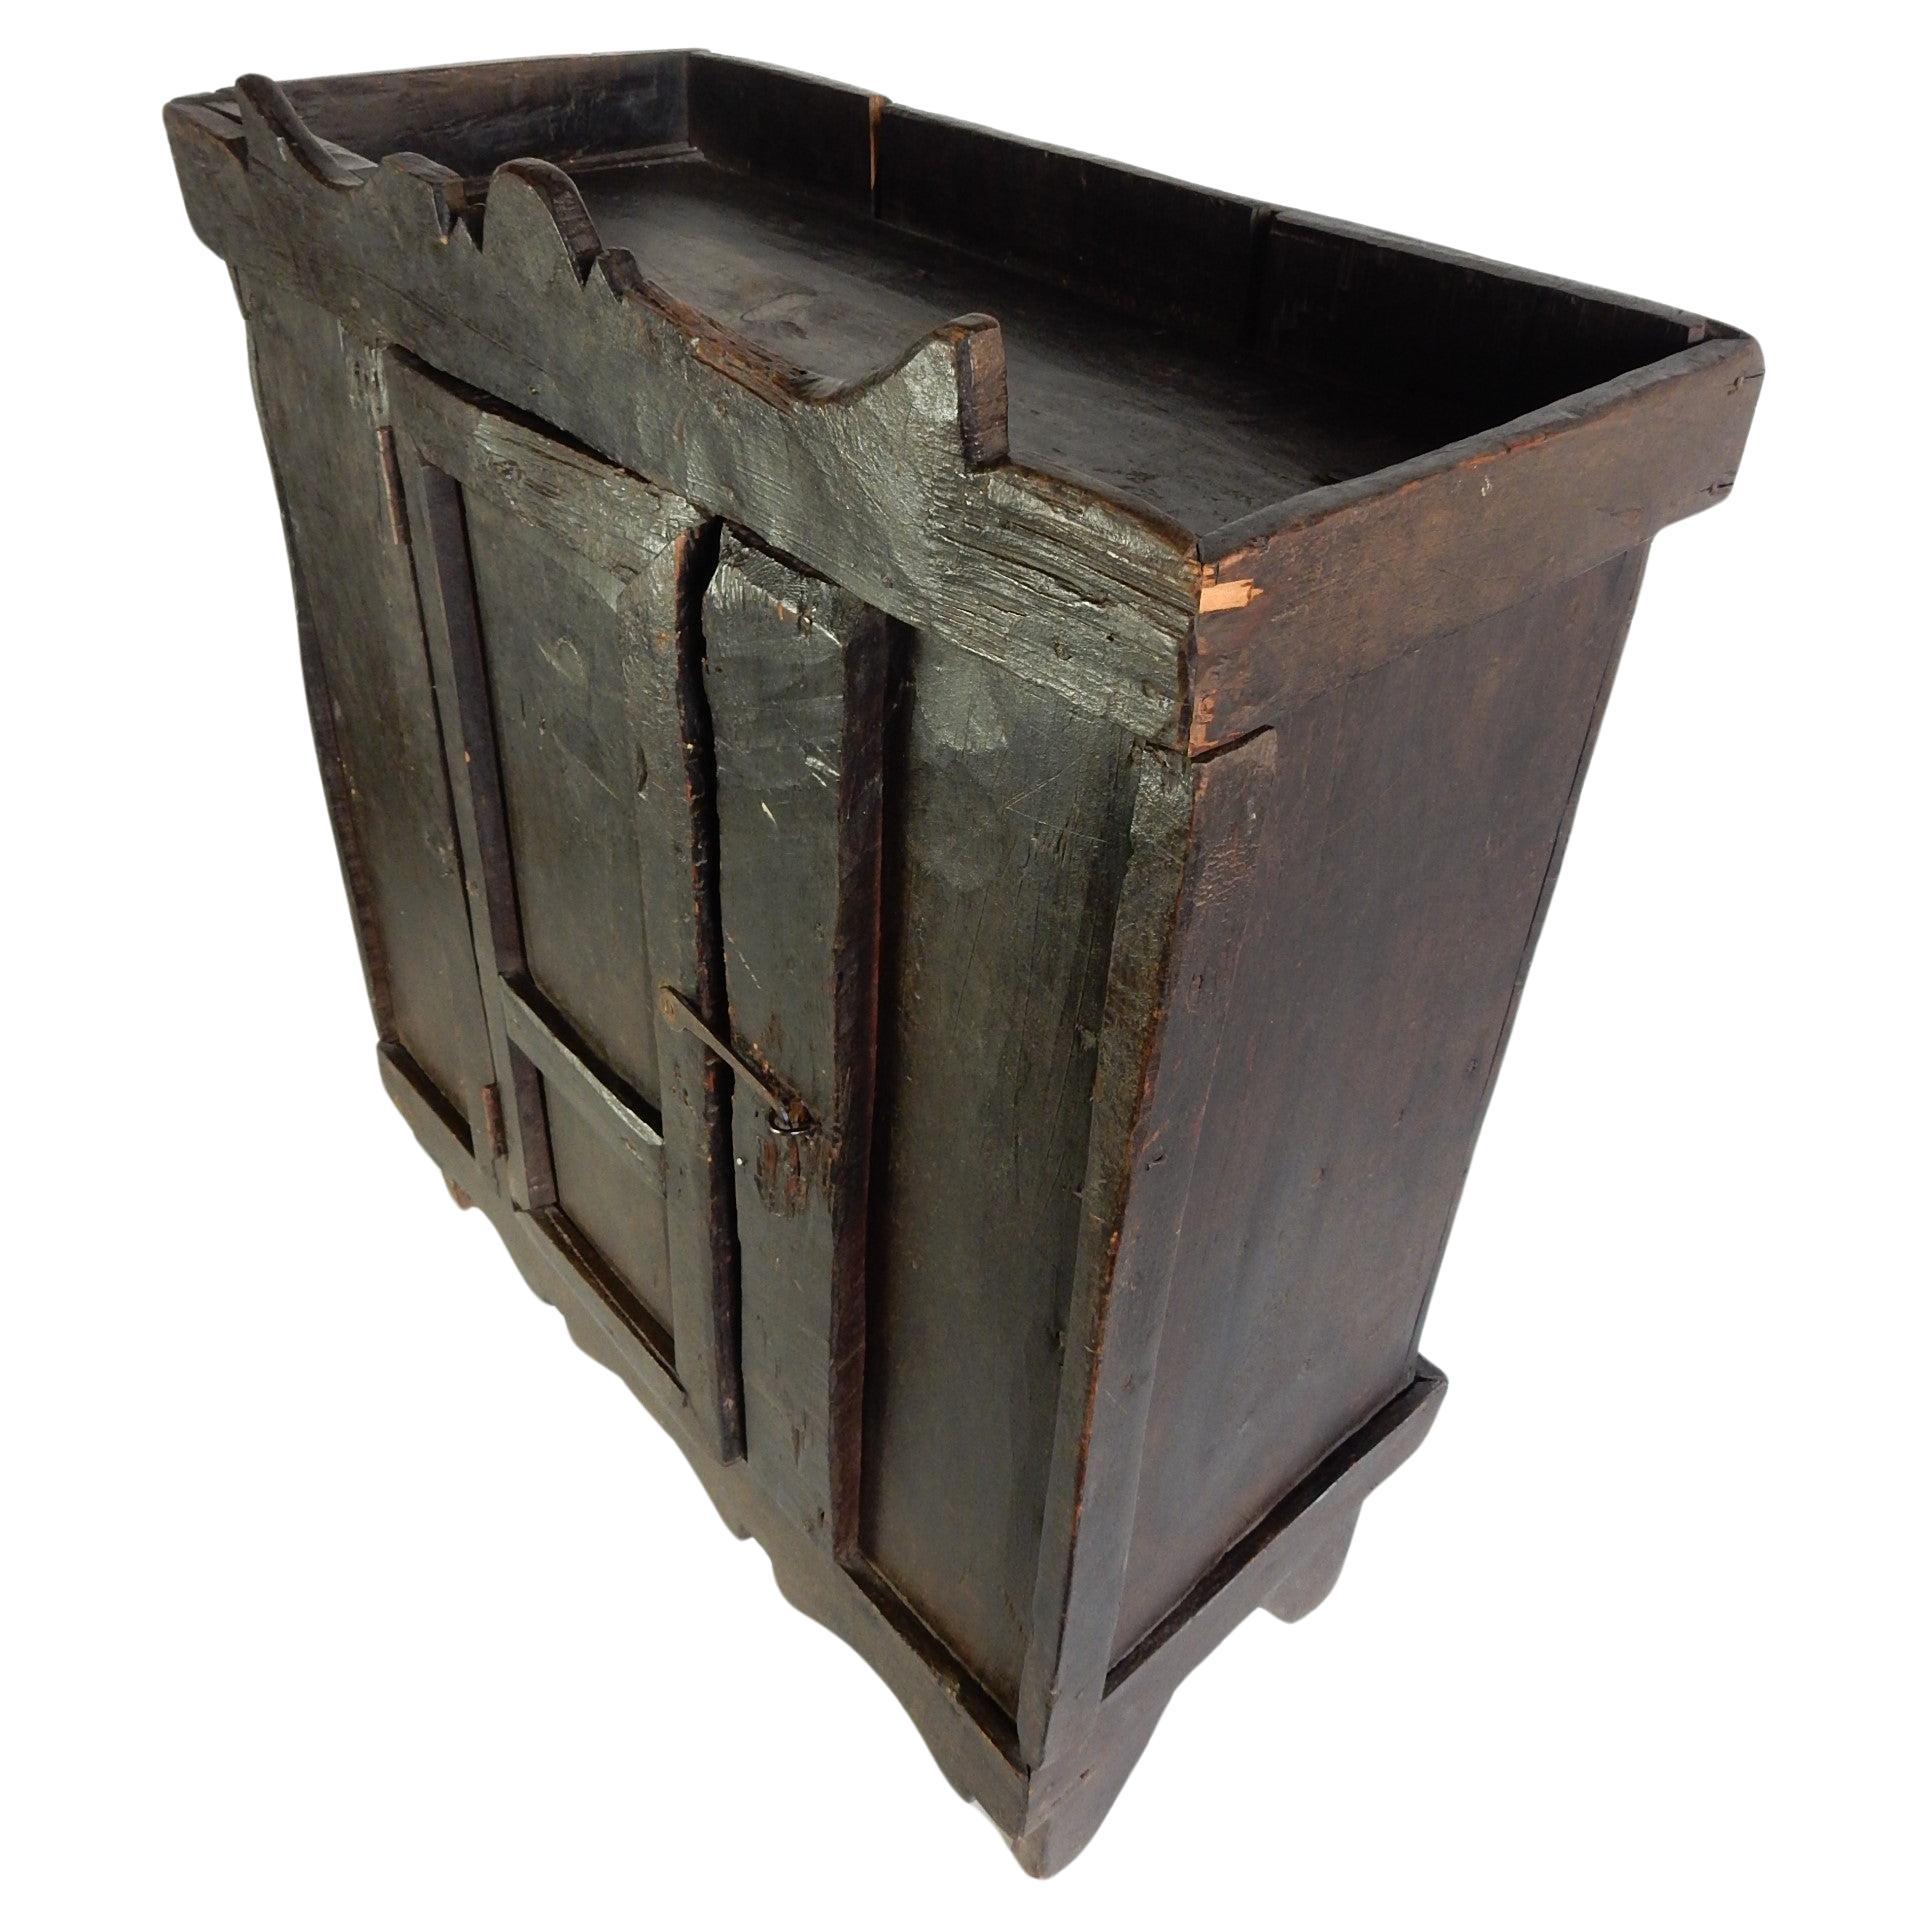 Wood Travail Populaire Rustic Wabi Sabi Cabinet, early 19th Century For Sale